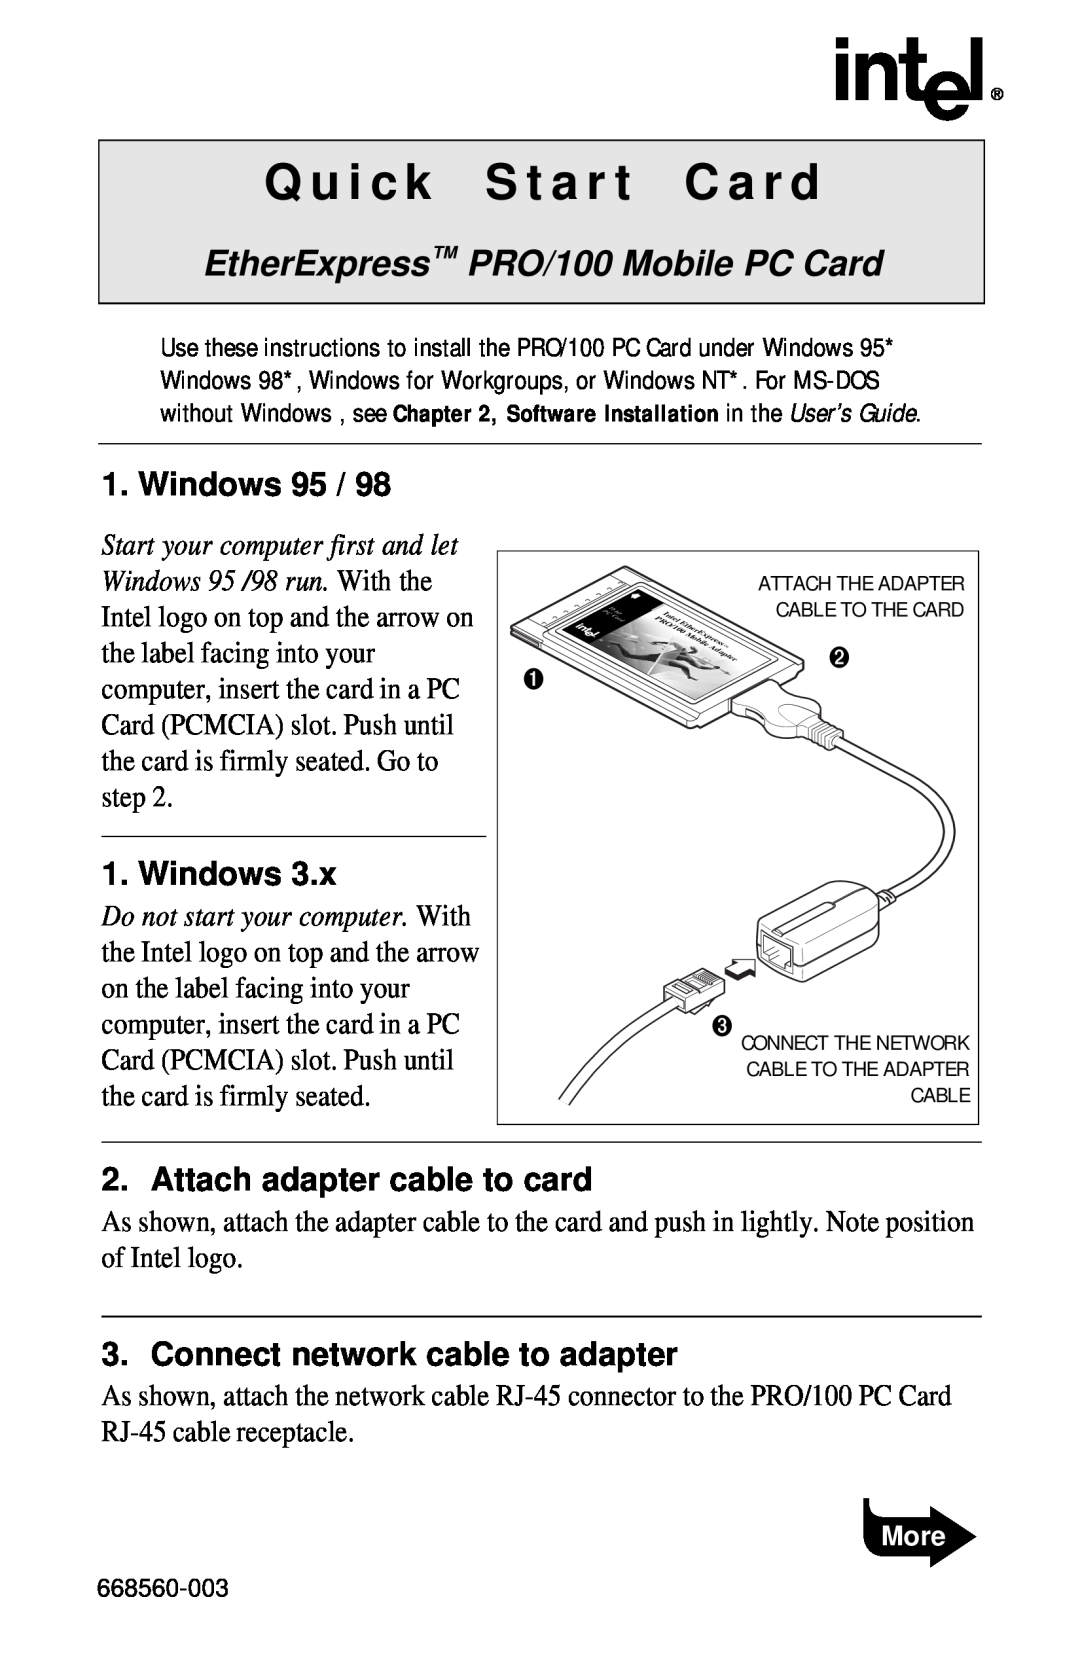 Intel PRO/100 quick start Windows 95, Attach adapter cable to card, Connect network cable to adapter 